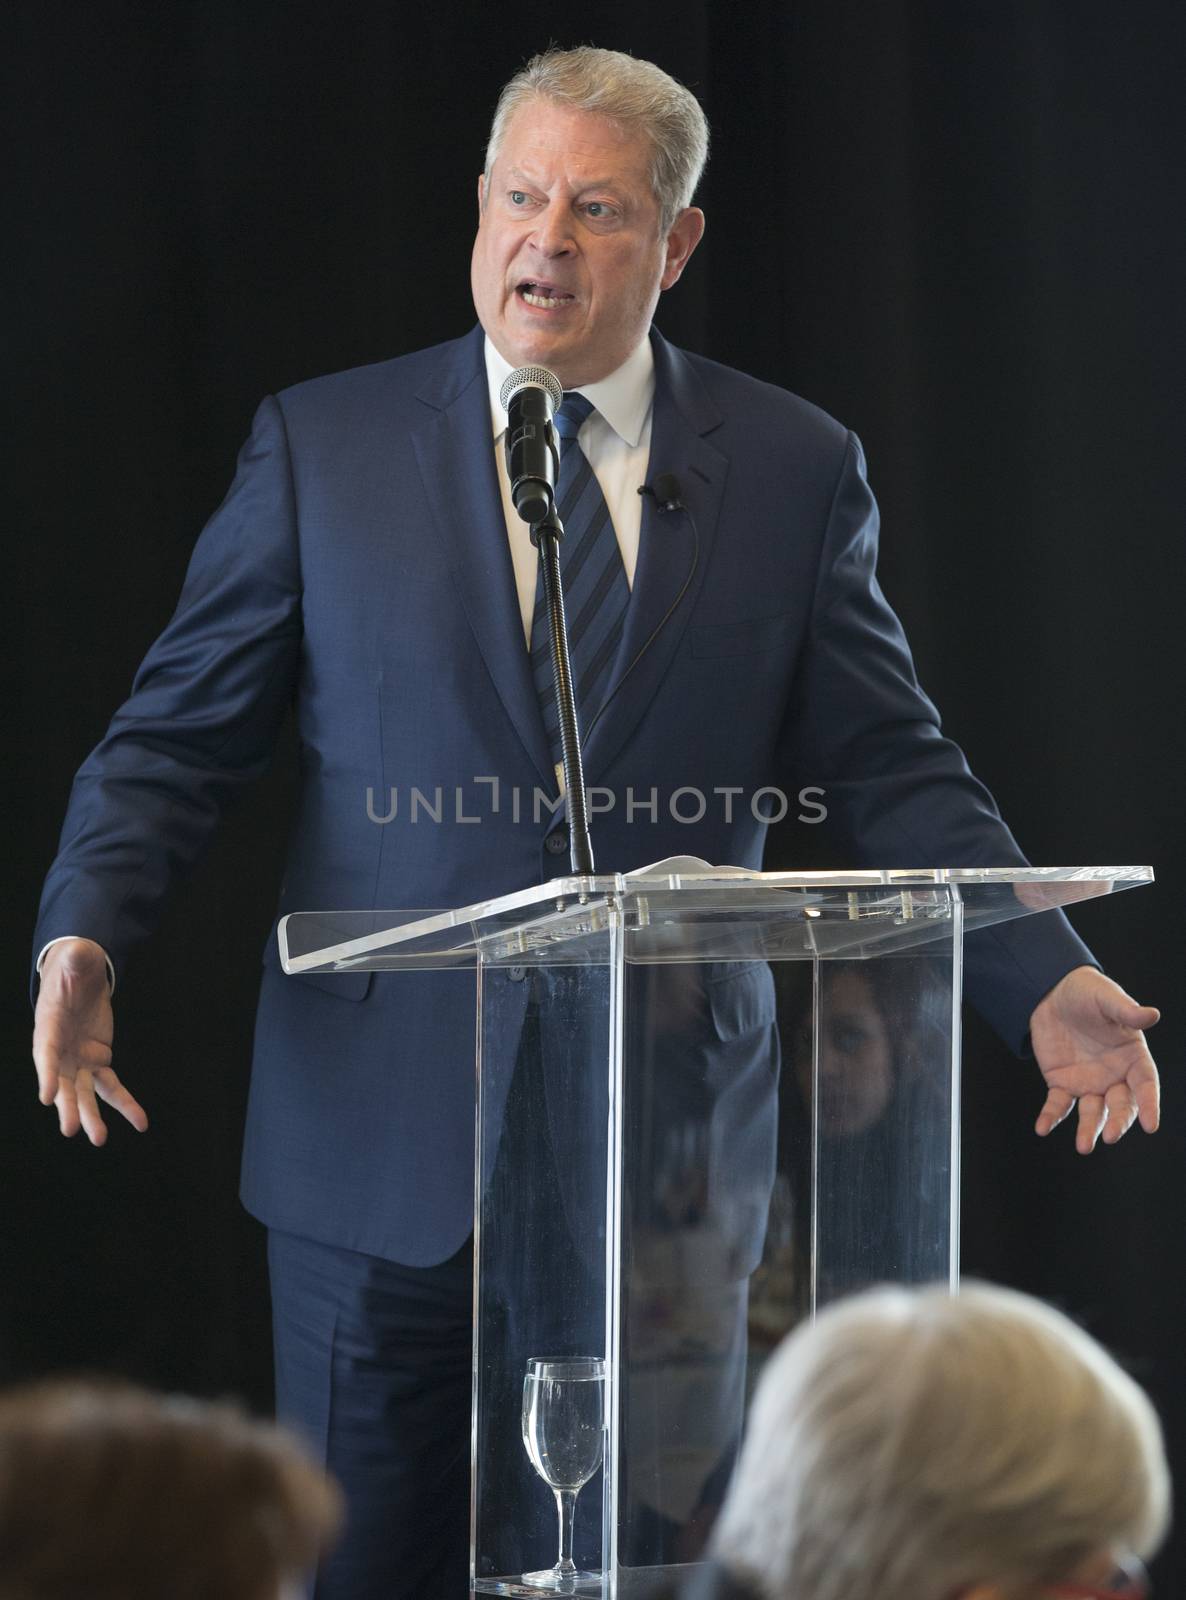 USA, New York: Former vice president and environmental activist Al Gore addresses the Investor Summit on Climate Risk at the United Nations in New York City on January 27, 2016. There, leaders and investors discuss climate change and the future of clean energy, following on the Paris Agreement, struck at COP21 in December.